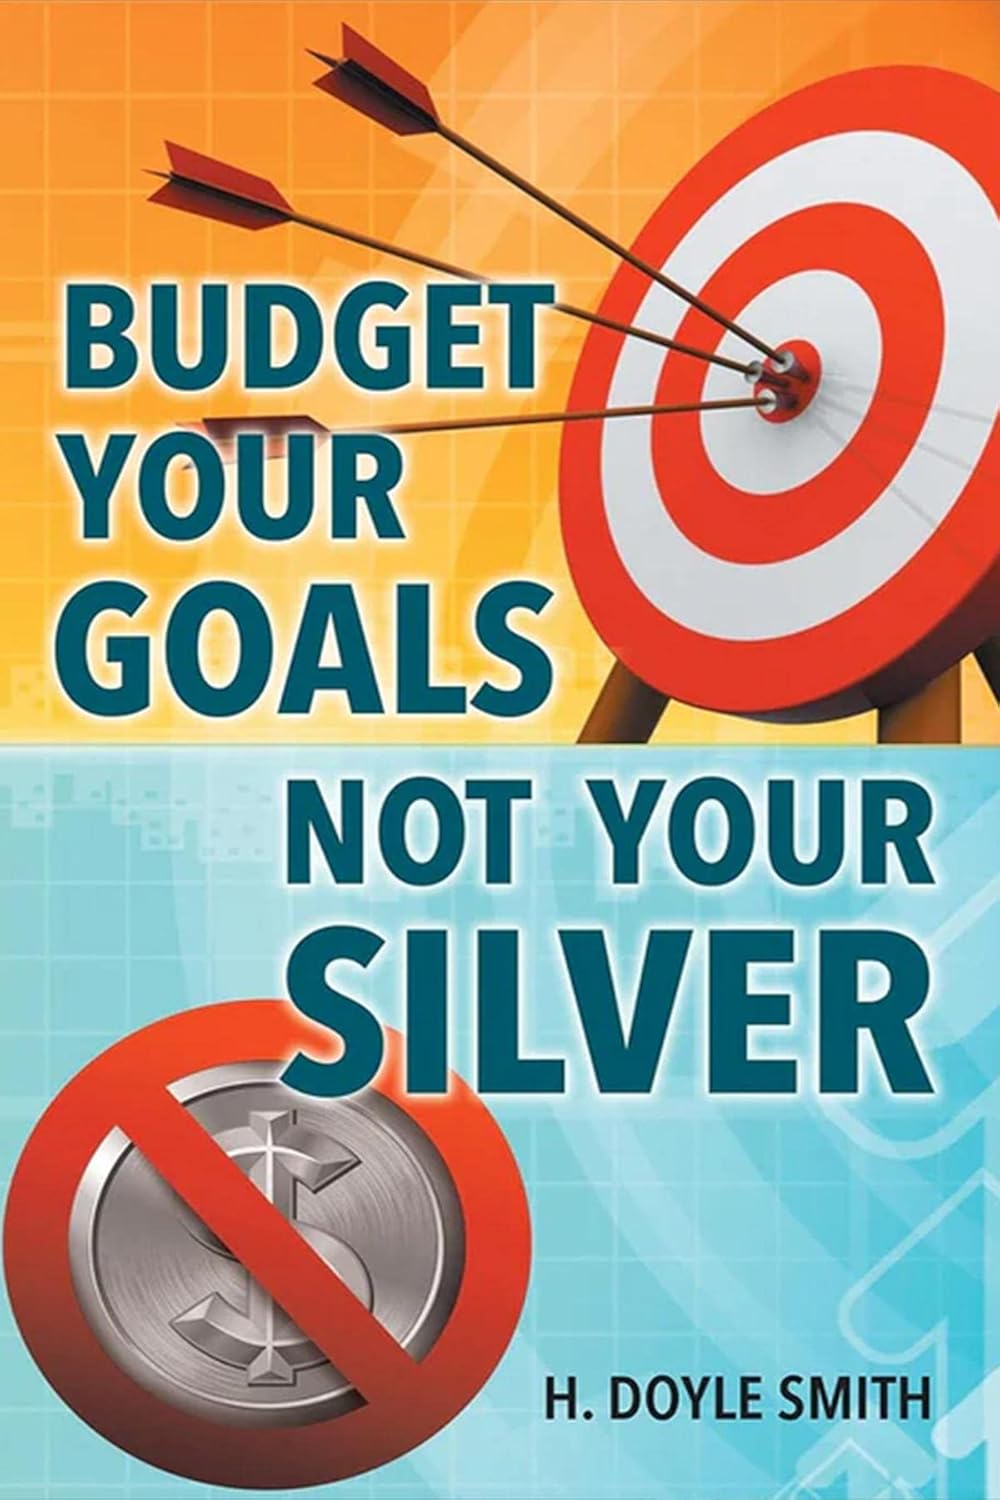 Discover Financial Freedom with H Doyle Smith's New Book, "Budget Your Goals Not Your Silver"